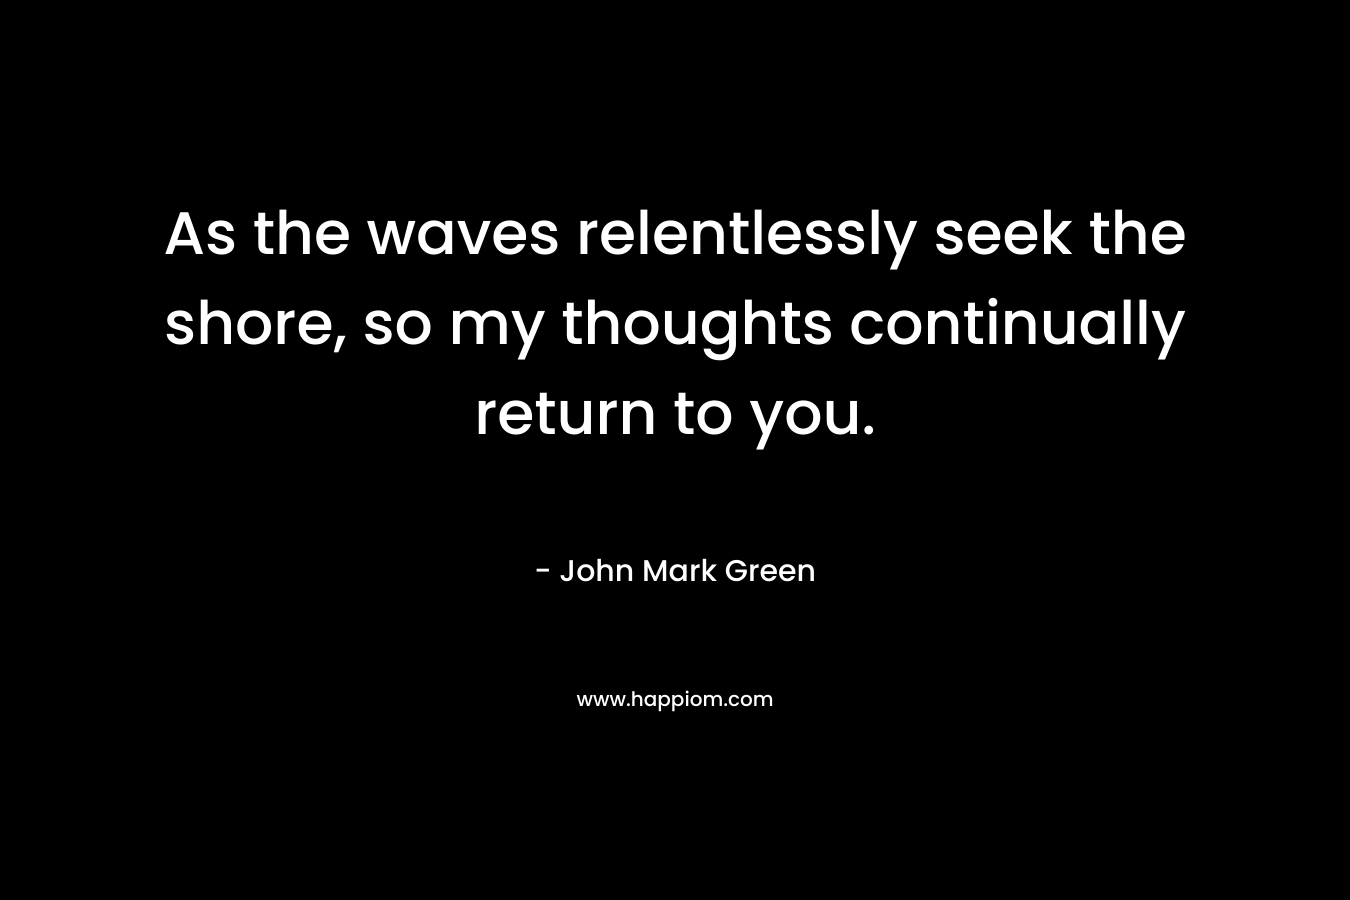 As the waves relentlessly seek the shore, so my thoughts continually return to you.